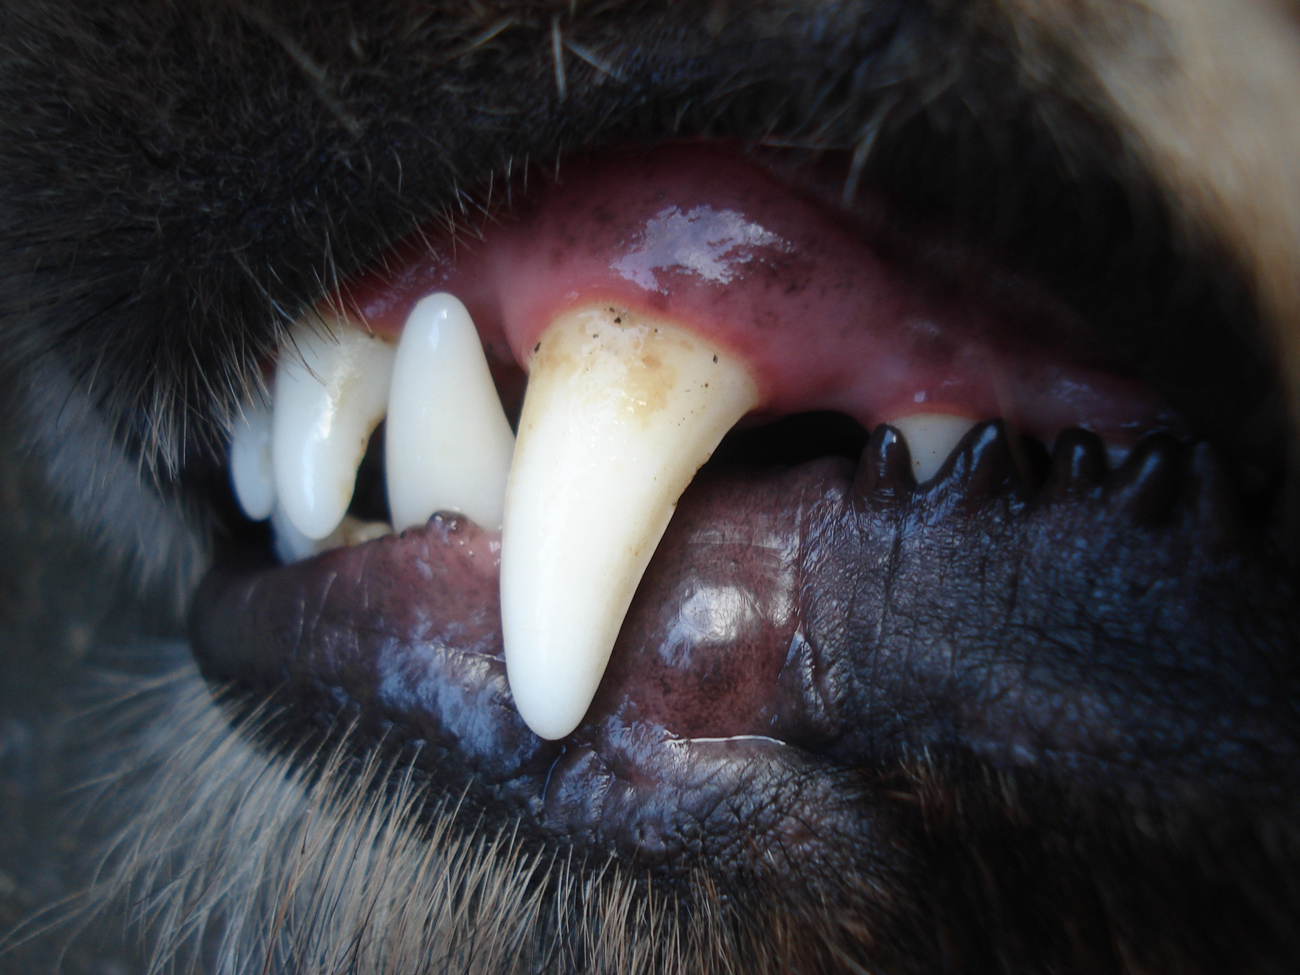 A dog's canine tooth visible with its mouth closed